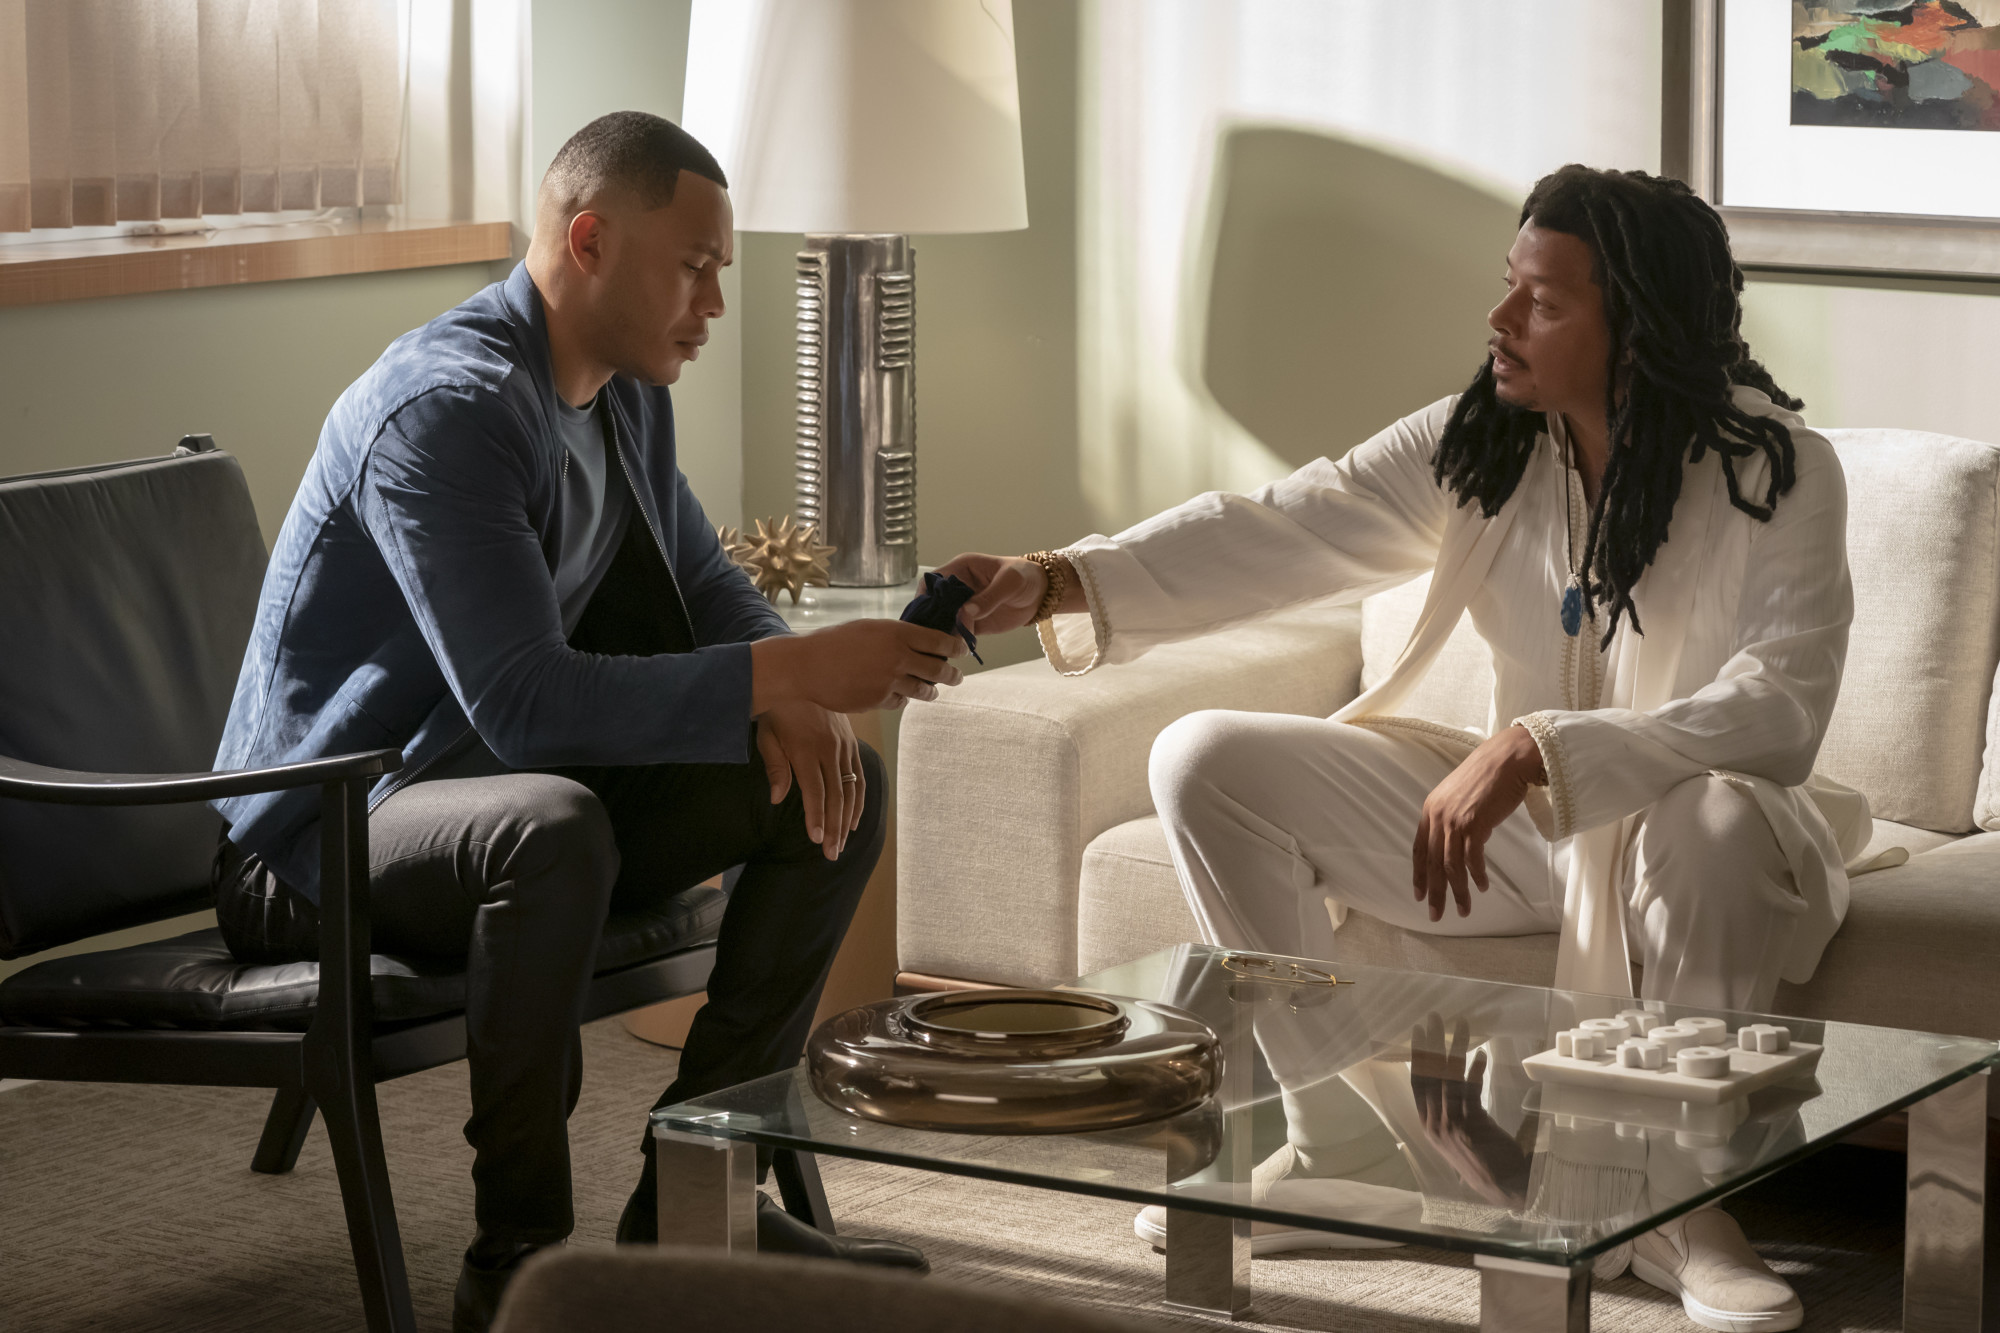 EMPIRE: L-R: Trai Byers and Terrence Howard in the "What Is Love" season premiere episode of EMPIRE airing Tuesday, Sept. 24 (9:00-10:00 PM ET/PT) on FOX. ©2019 Fox Broadcasting Co. All Rights Reserved. CR: Chuck Hodes/FOX.